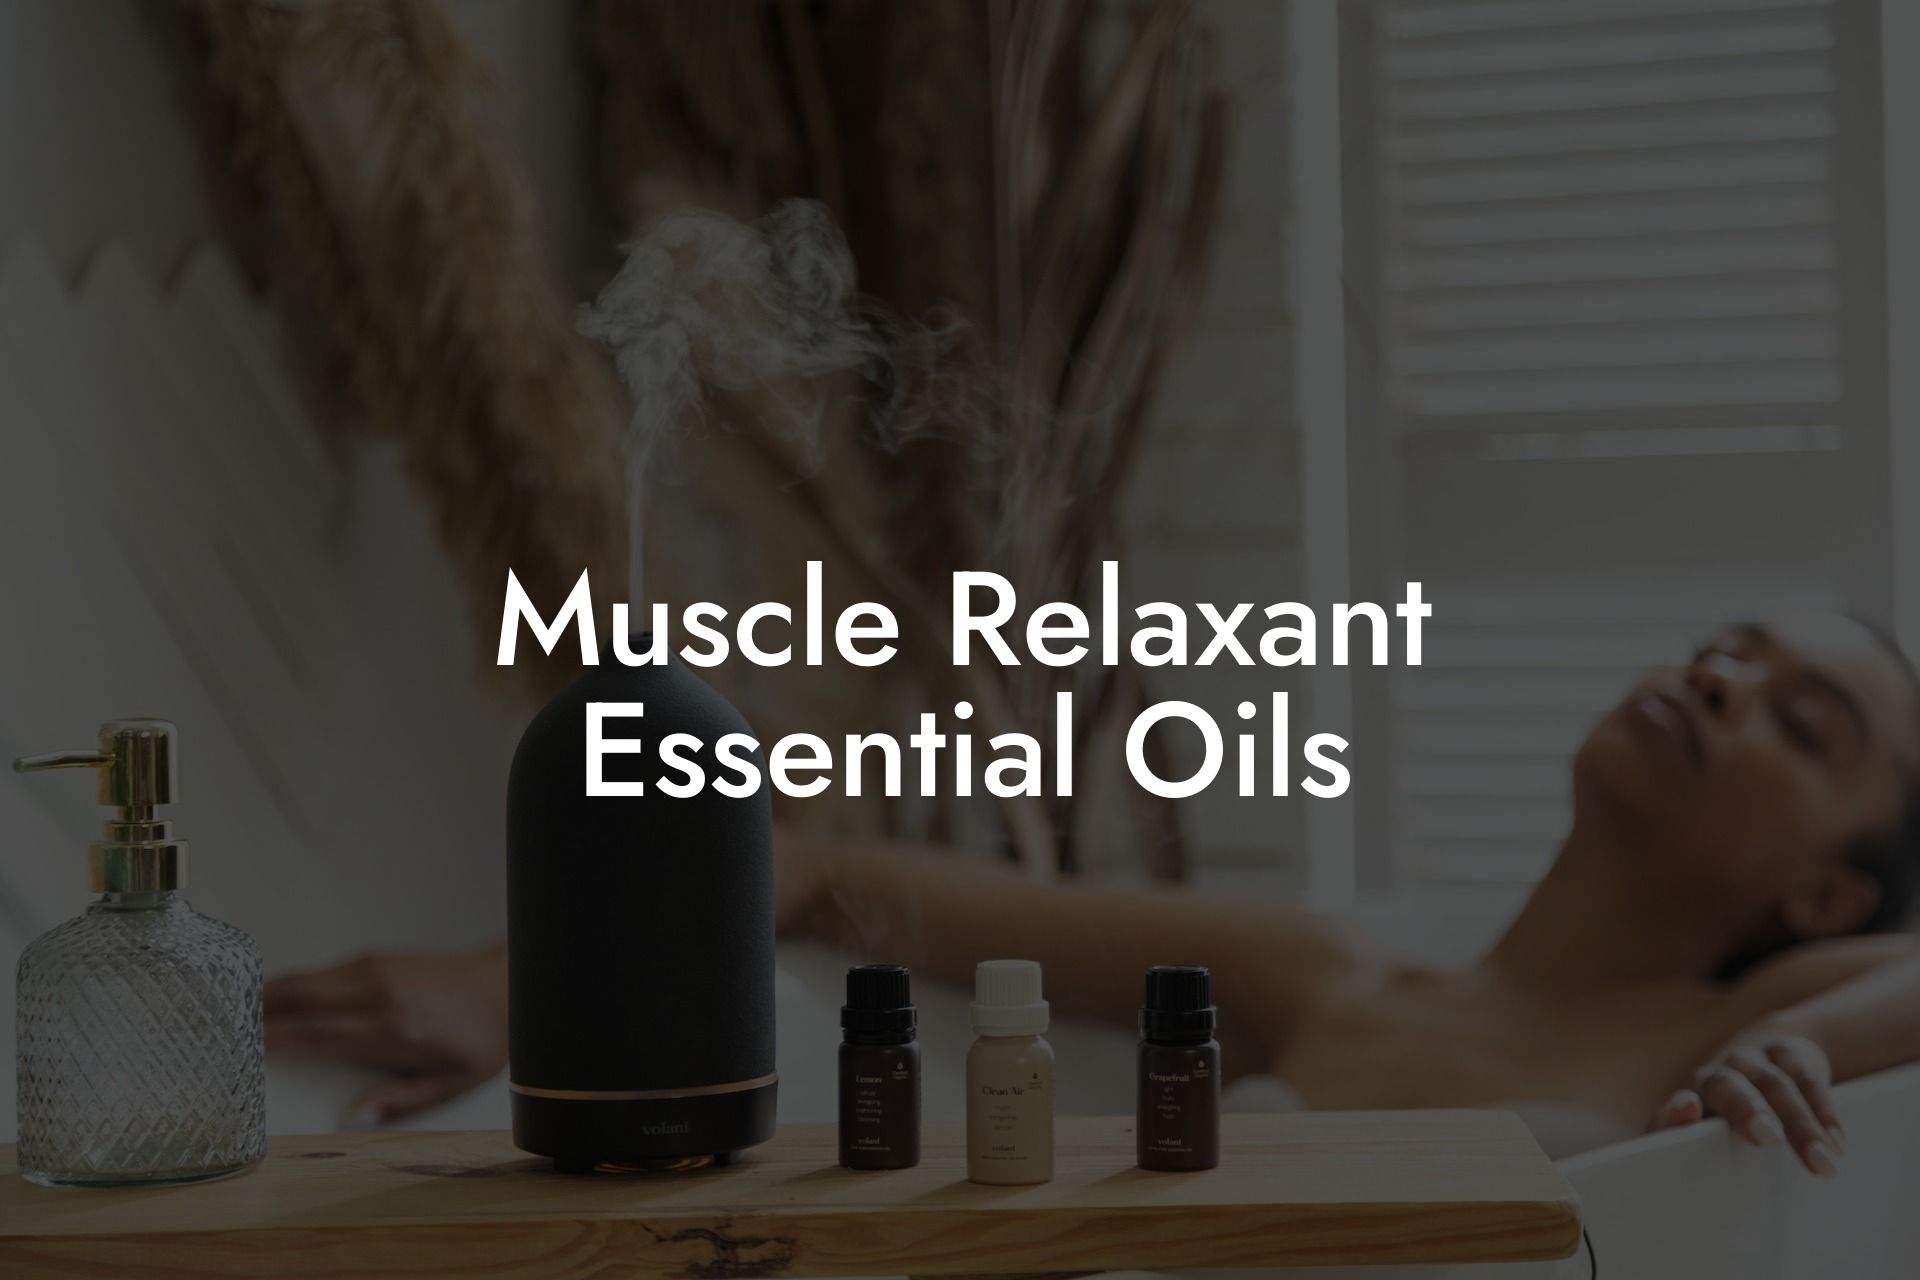 Muscle Relaxant Essential Oils